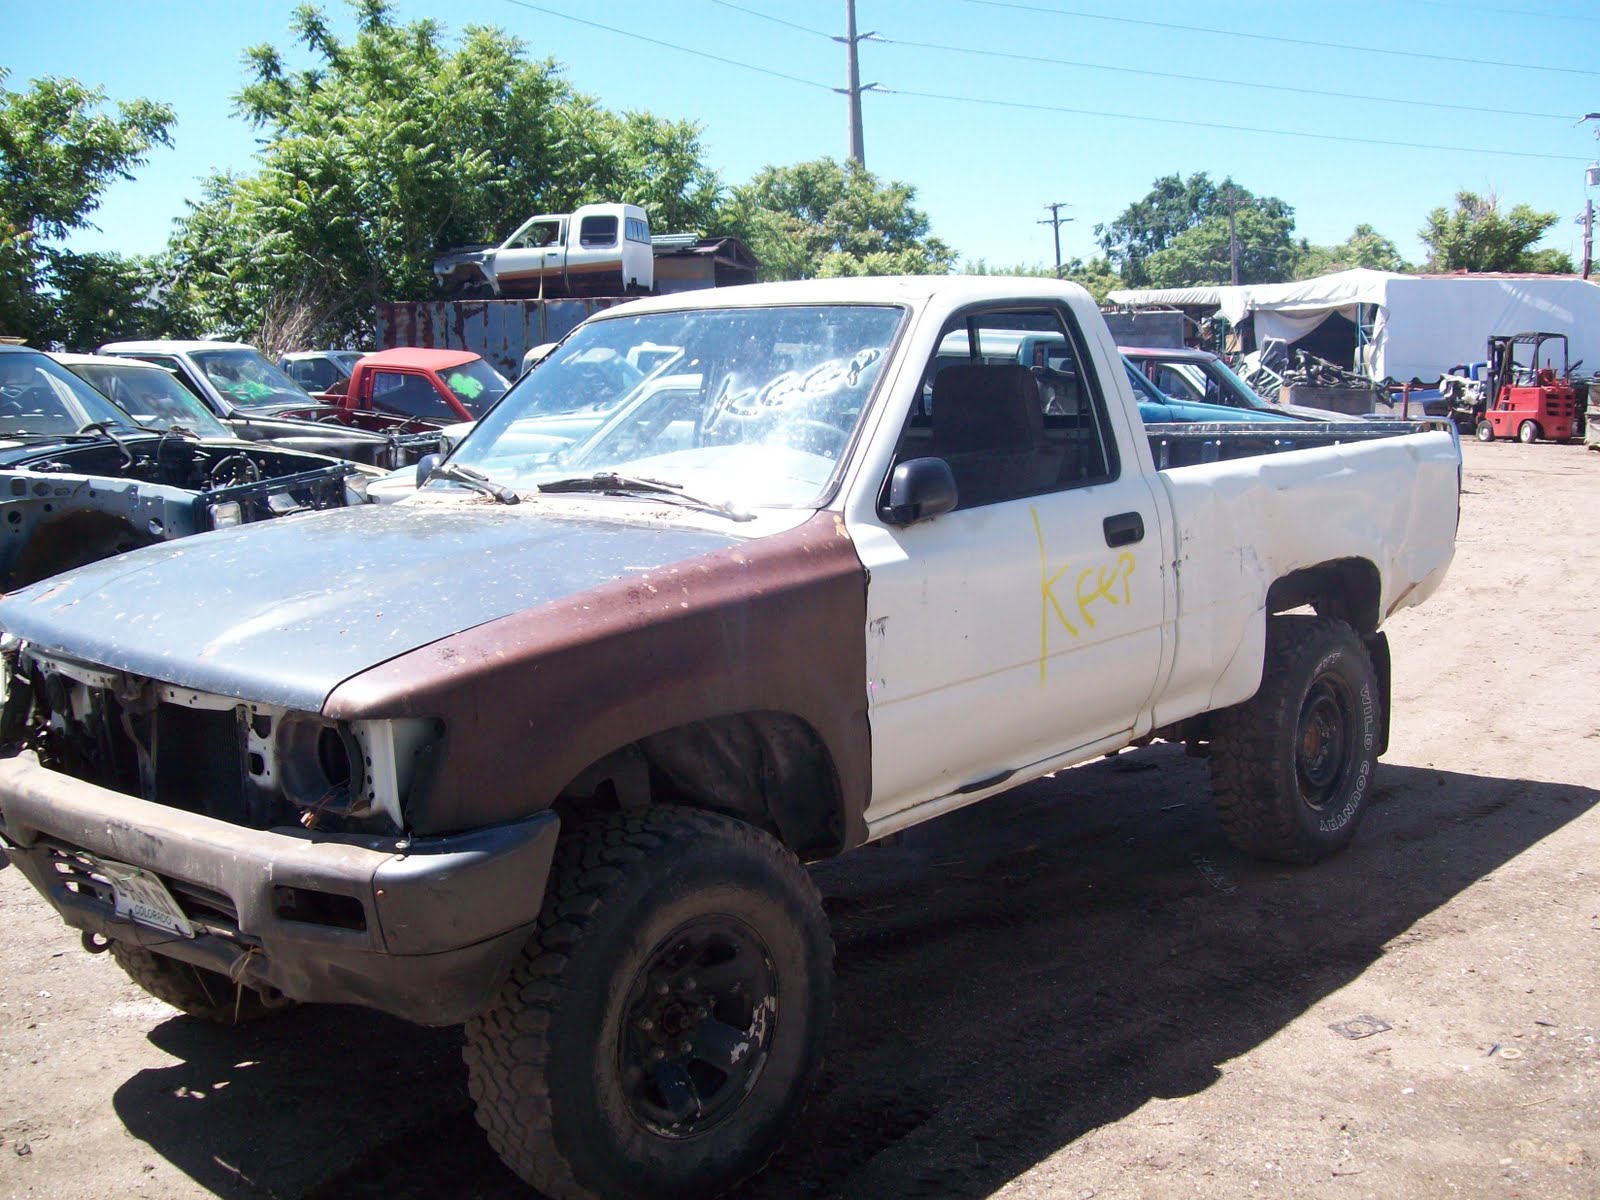 1983 Toyota pickup used parts